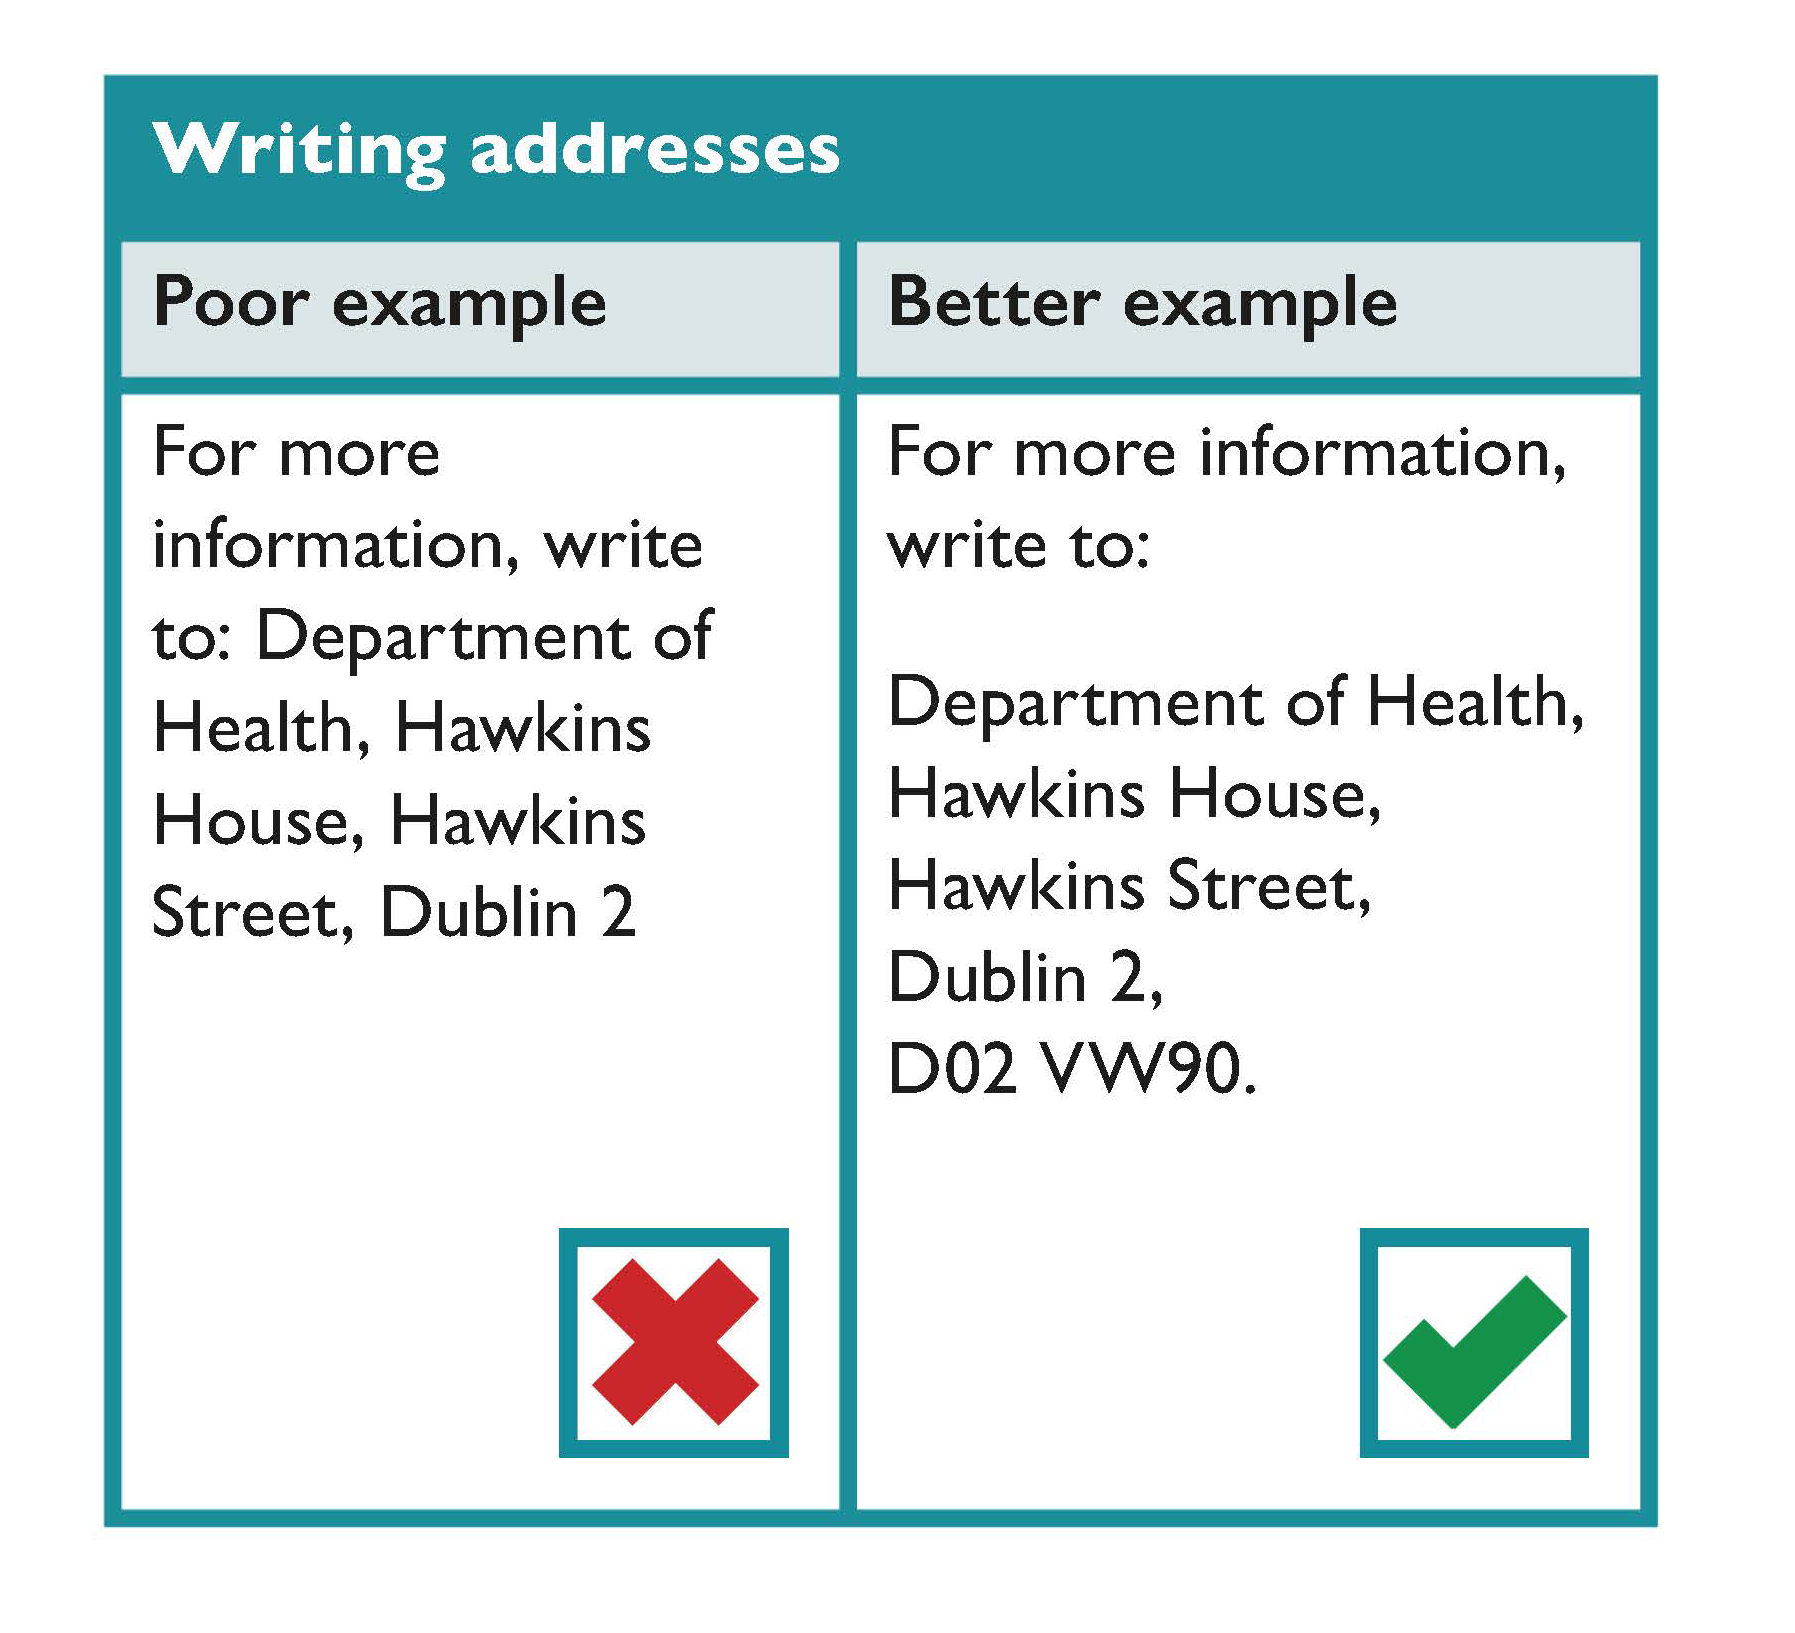 Example of how to write addresses